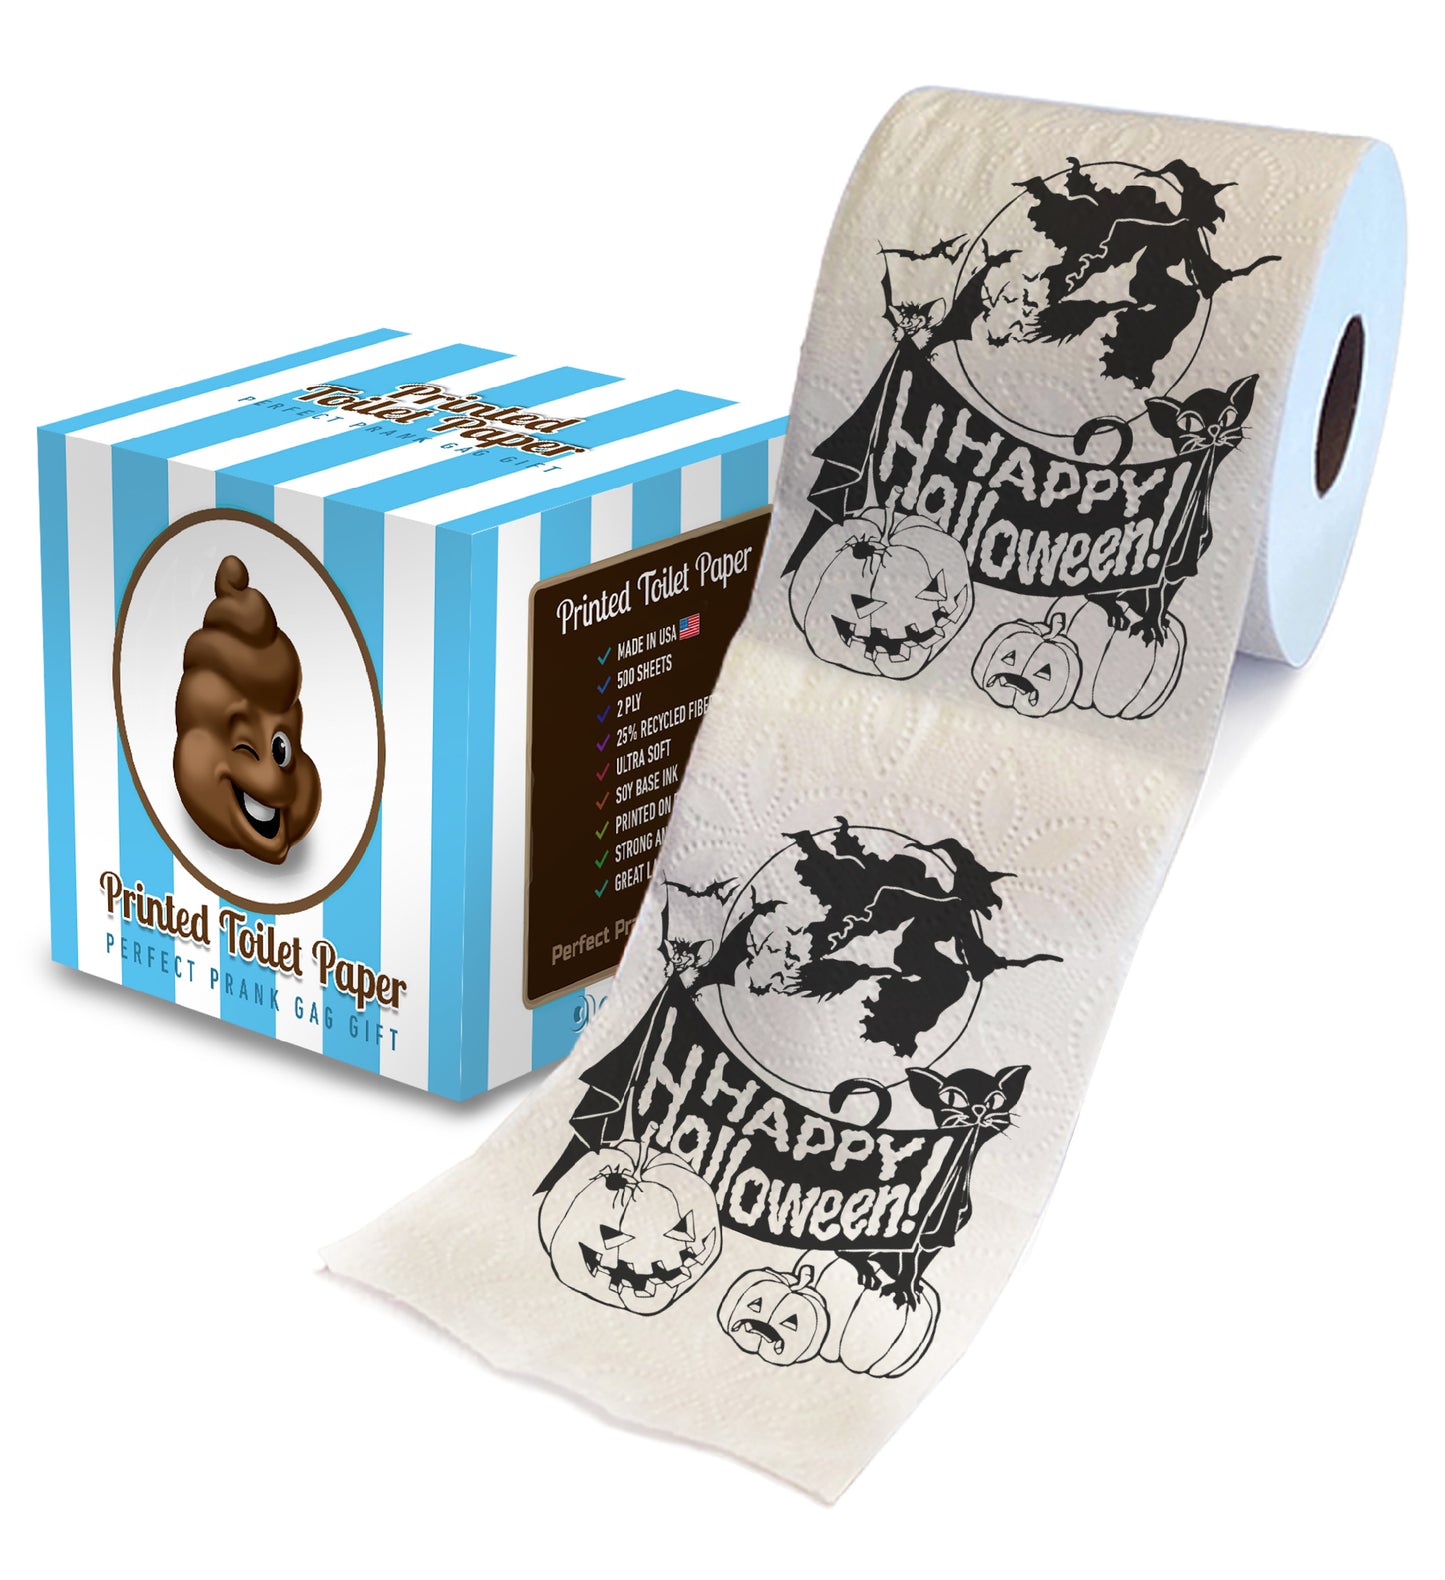 Printed TP Happy Halloween Printed Toilet Paper Funny Gag Gift